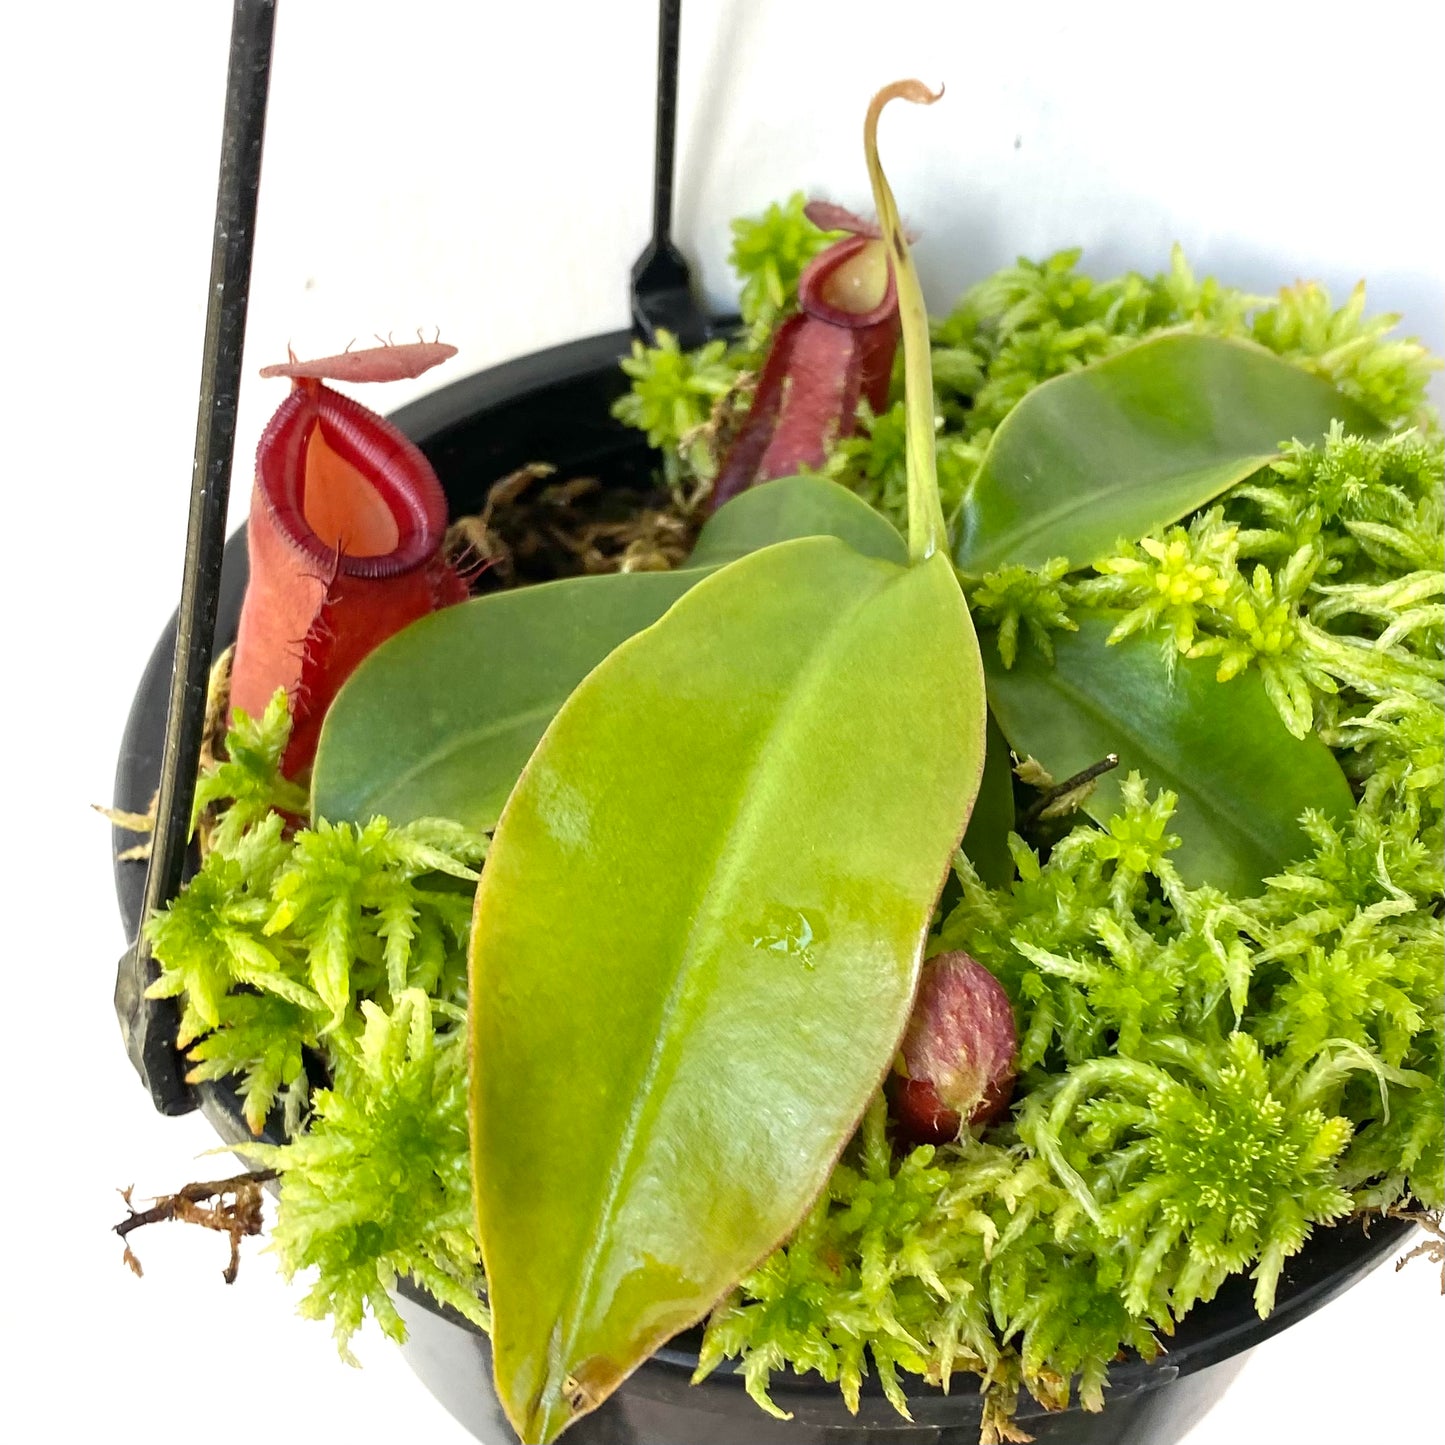 Nepenthes “Diana”